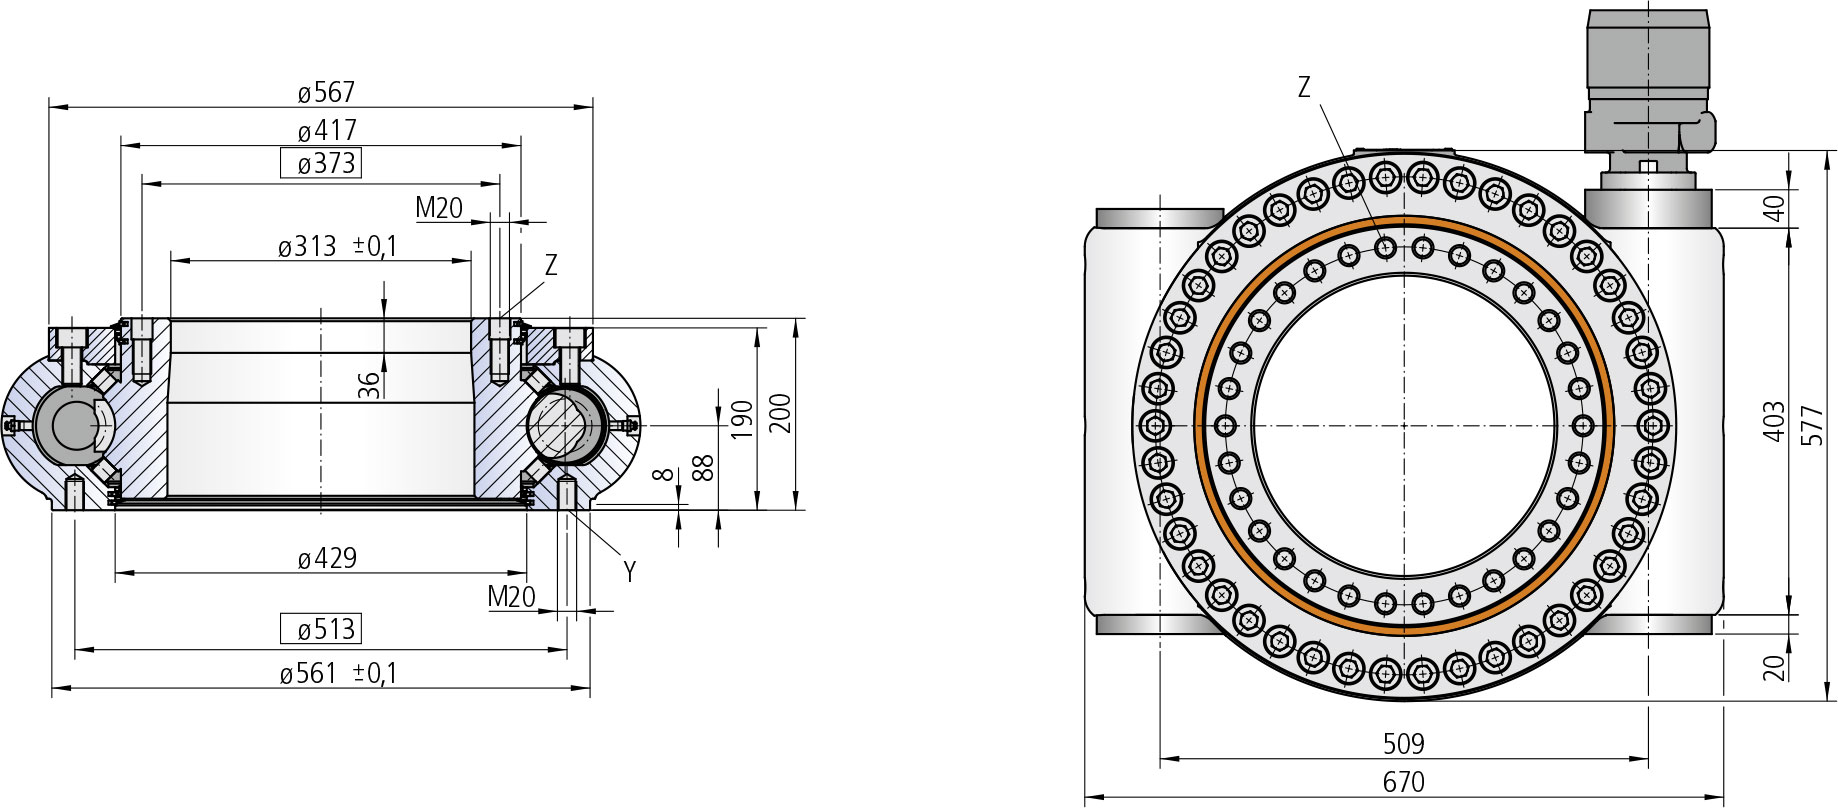 WD-H 0373 / 1 drive WD-H Series cad drawing